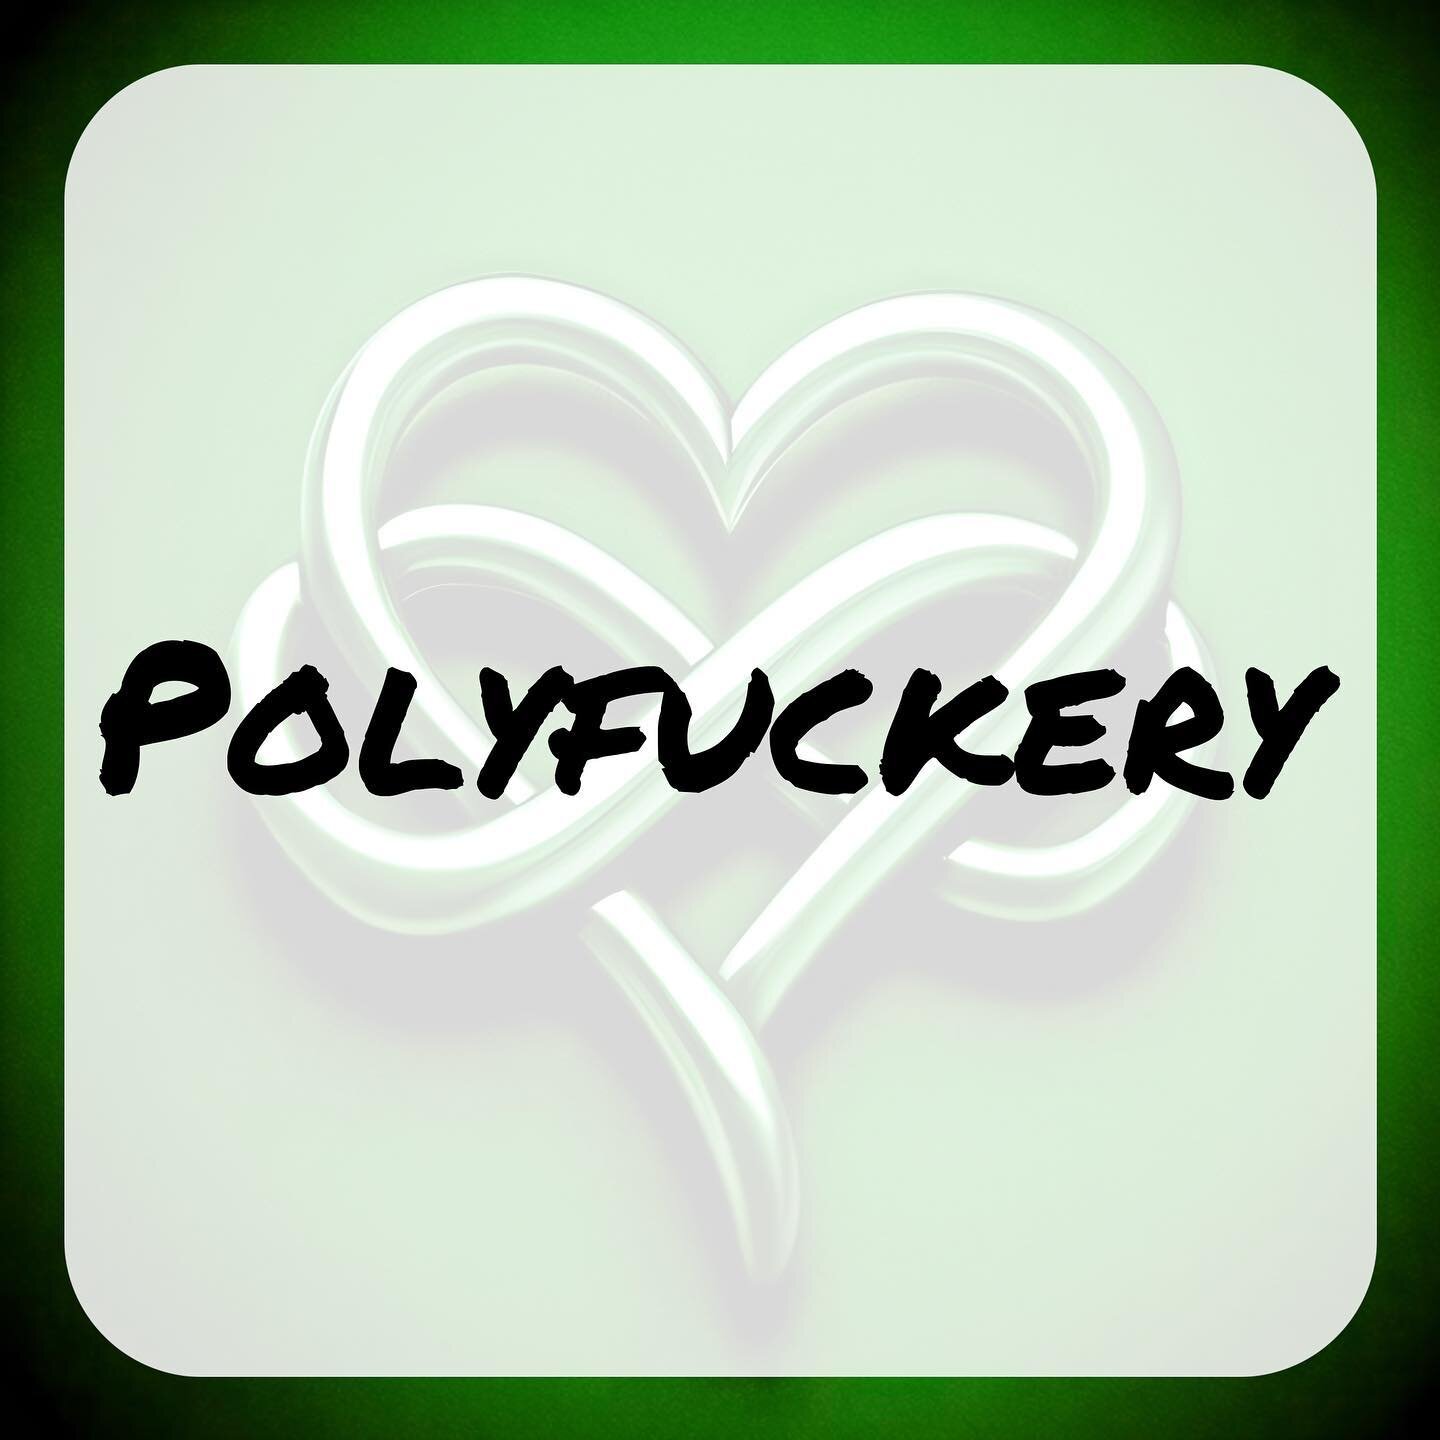 Beware the pitfalls of polyfuckery! Don't be fooled by posers in the polyamorous world. Stay true to ethical non-monogamy and shun the irresponsible actions. Let me guide you through the twisty path of authentic polyamory. Are you ready to experience